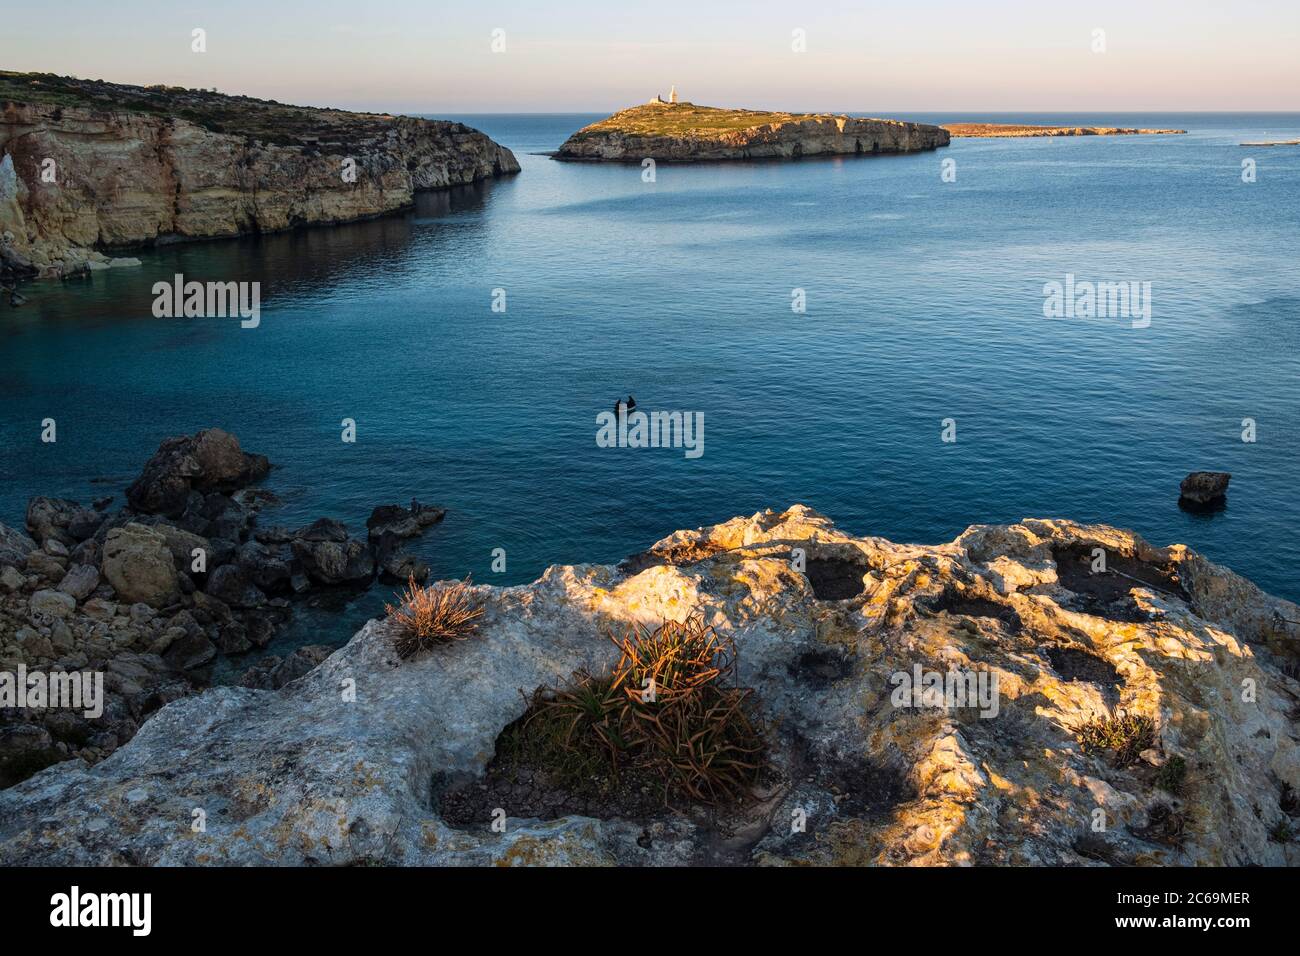 Evening view towards Selmunett or Saint Paul's Islands and two men fishing from a boat, Malta Stock Photo